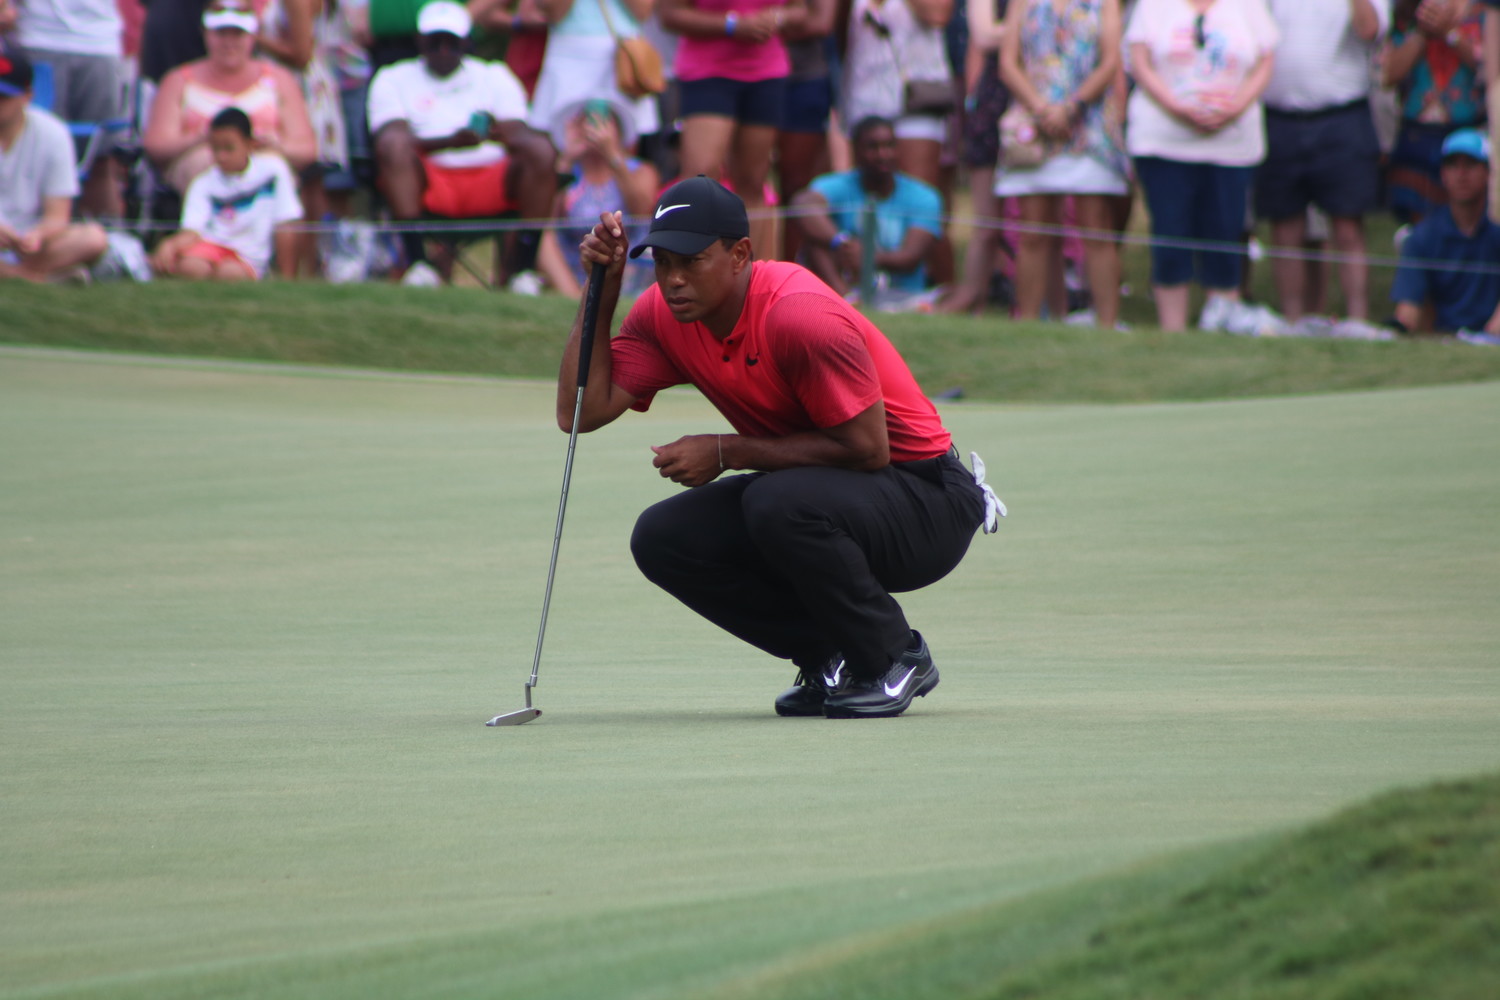 Tiger Woods eyes up a shot at THE PLAYERS Championship 2018 in Ponte Vedra Beach.